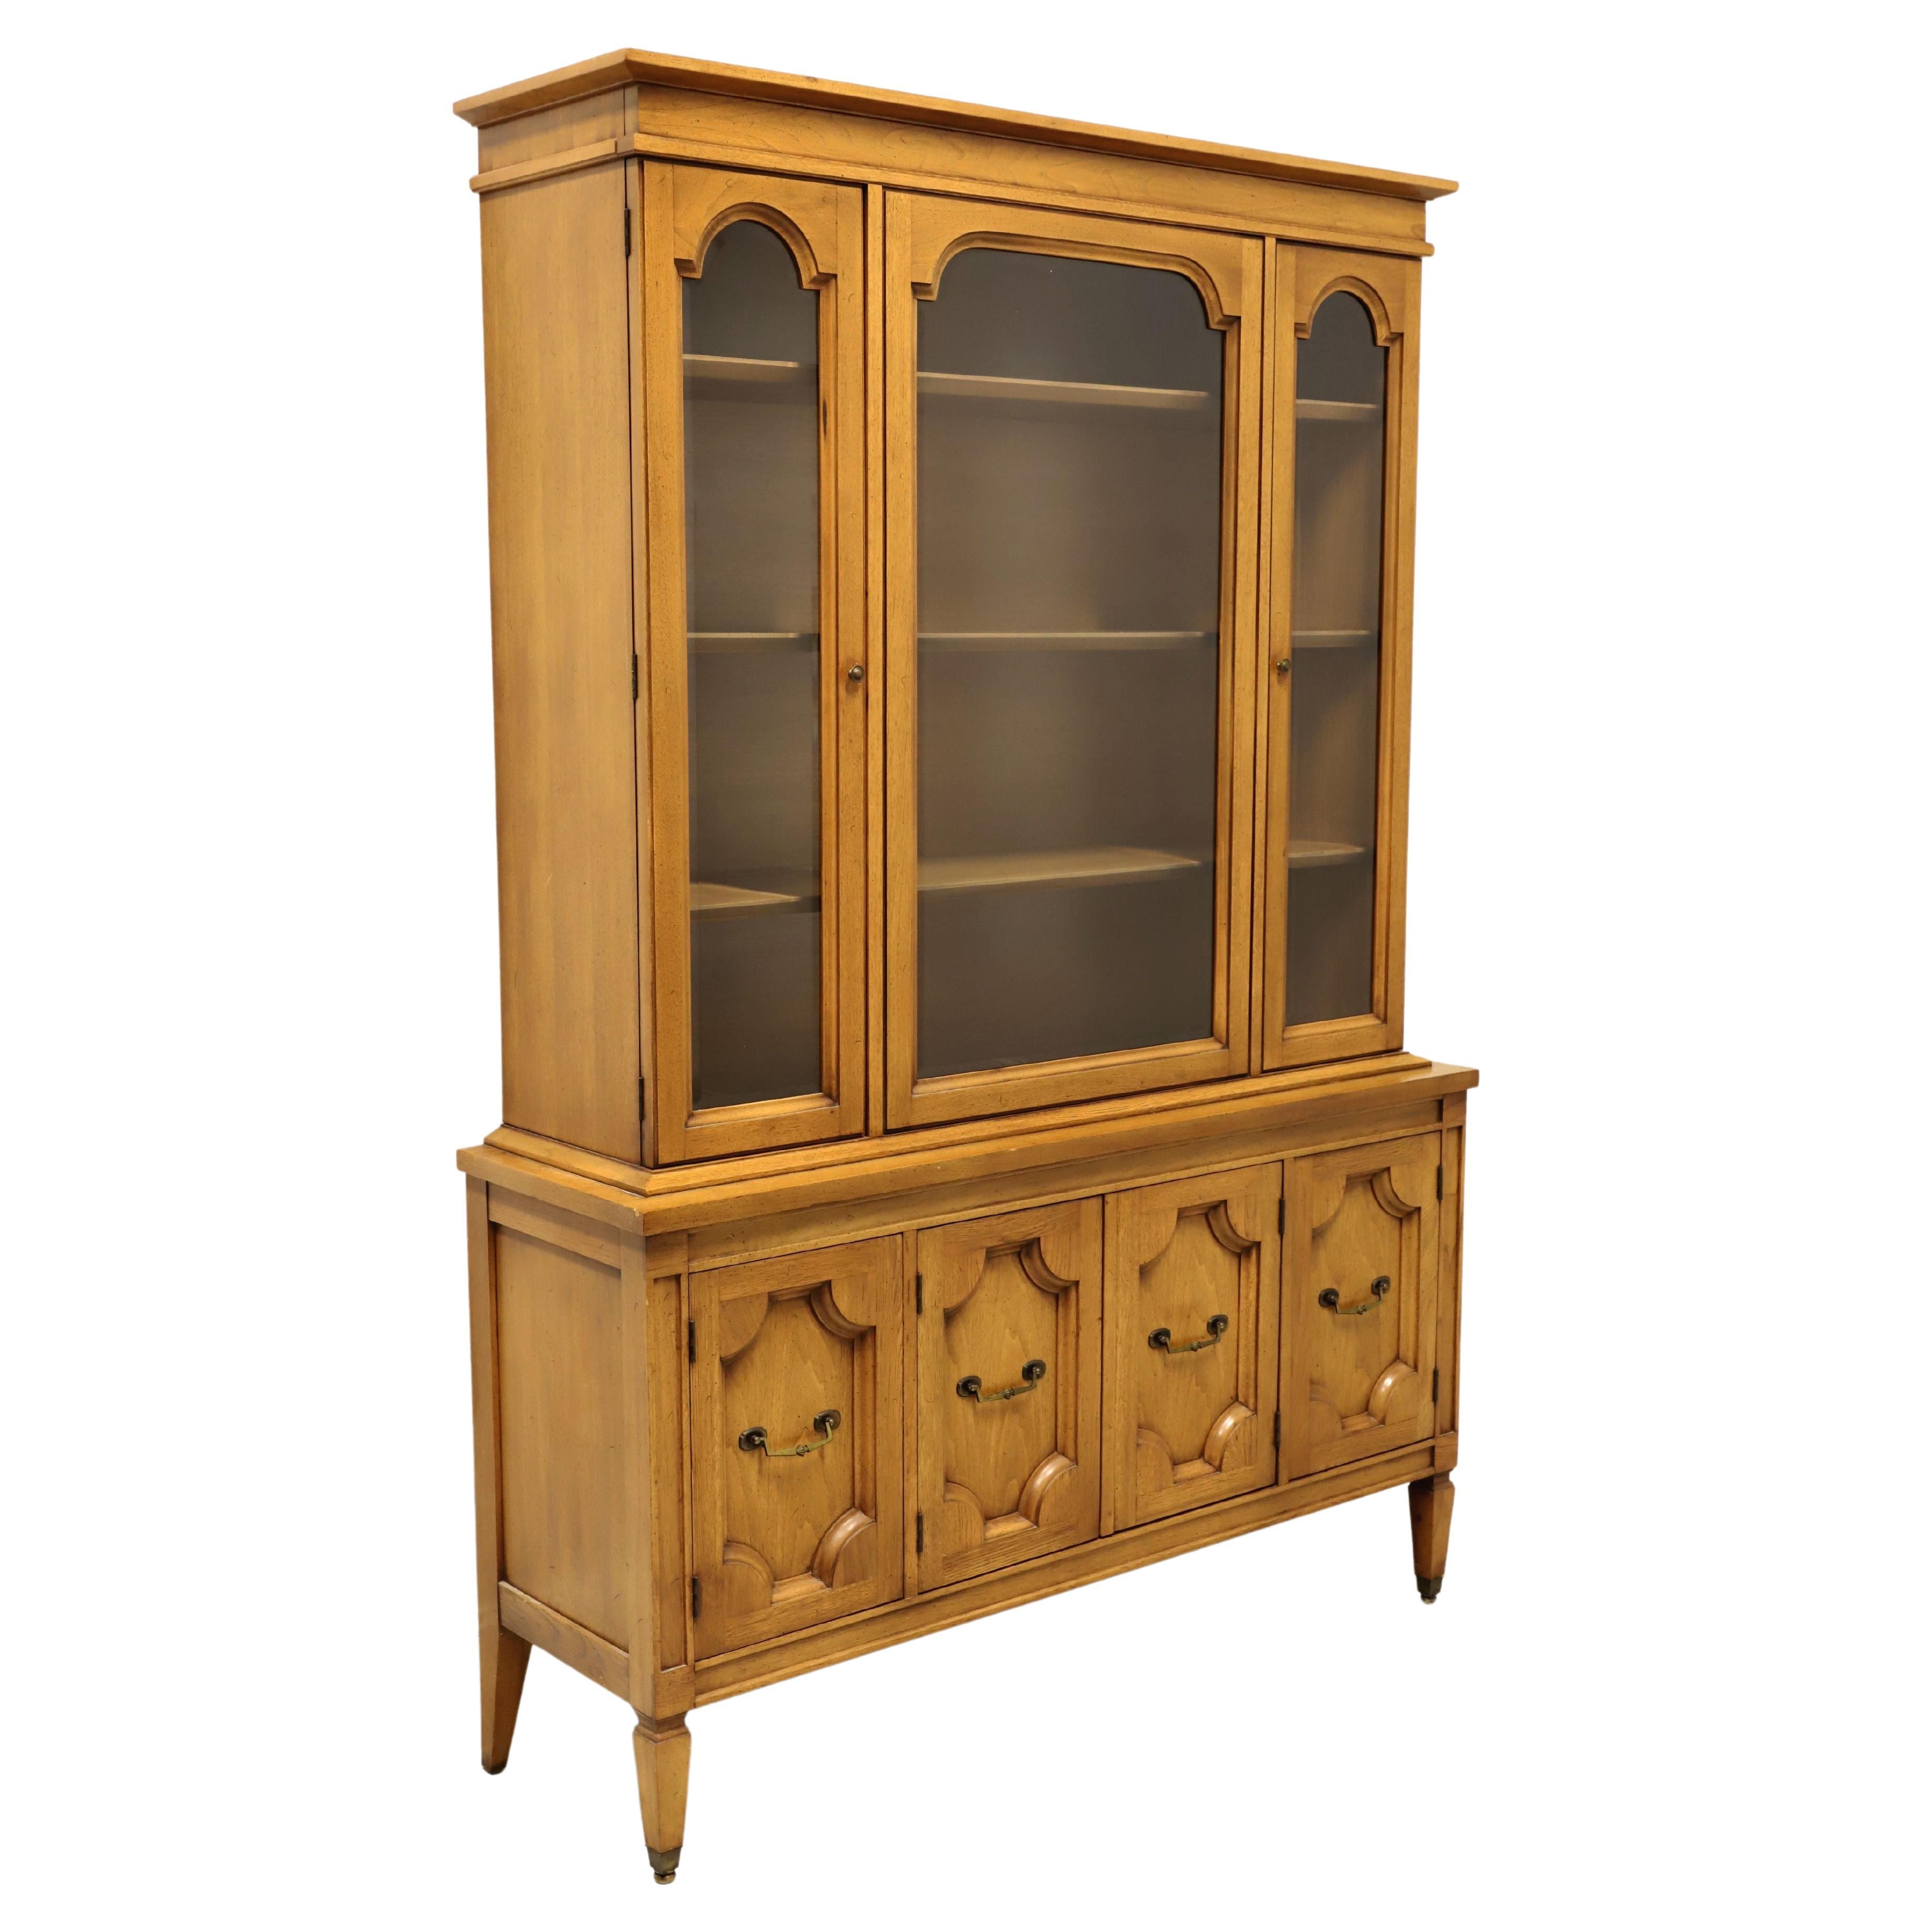 BASIC WITZ Mid 20th Century Pecan Mediterranean Style China Cabinet For Sale